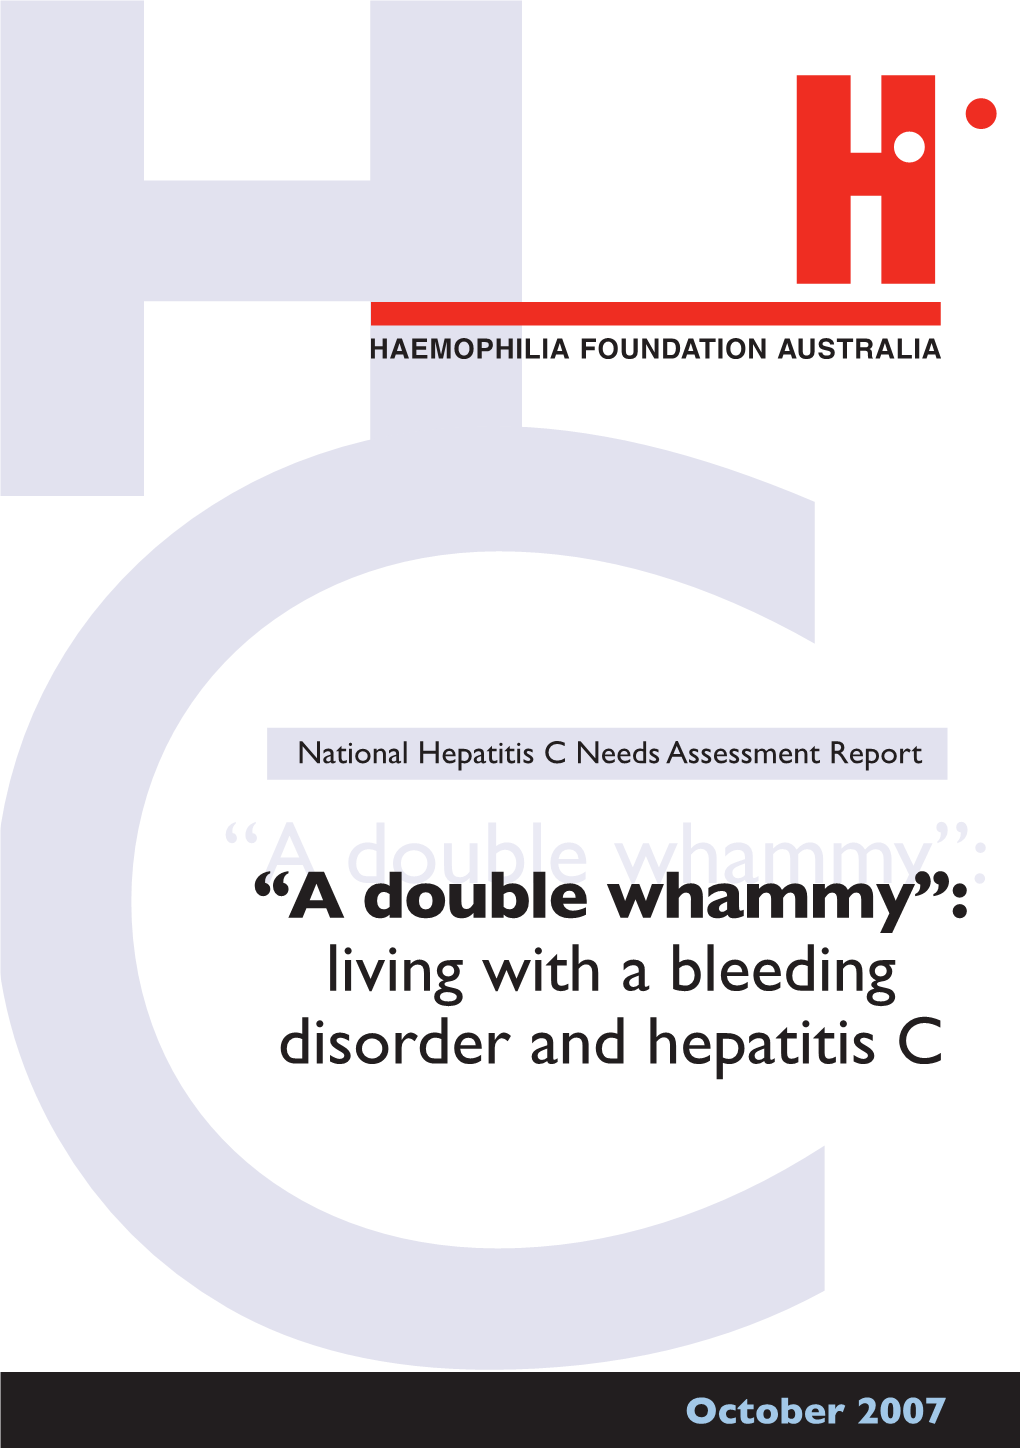 “A Double Whammy”: Living with a Bleeding Disorder and Hepatitis C